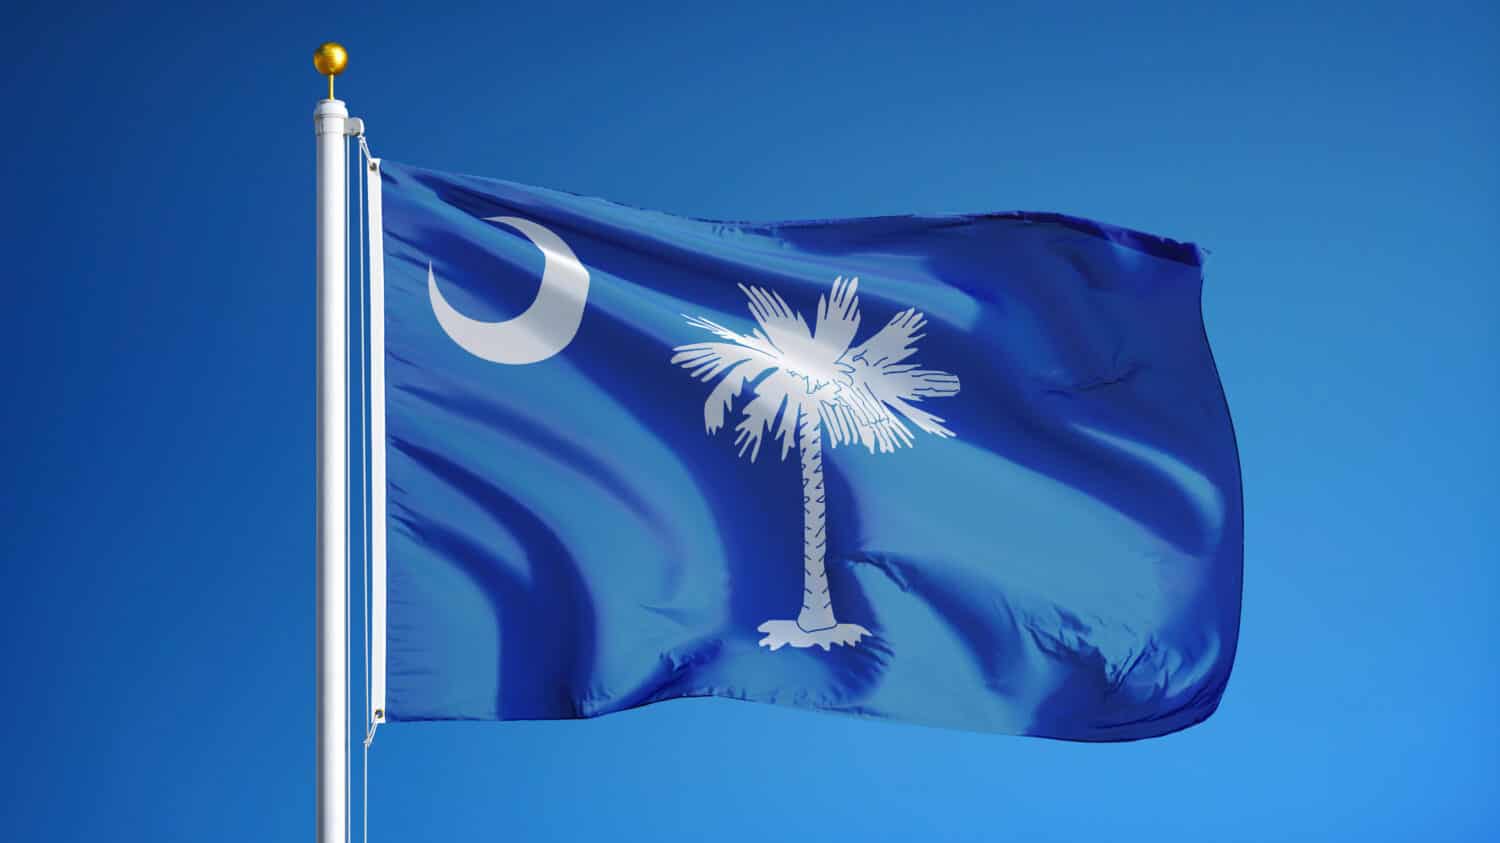 South Carolina (U.S. state) flag waving against clear blue sky, close up, isolated with clipping path mask alpha channel transparency, perfect for film, news, composition